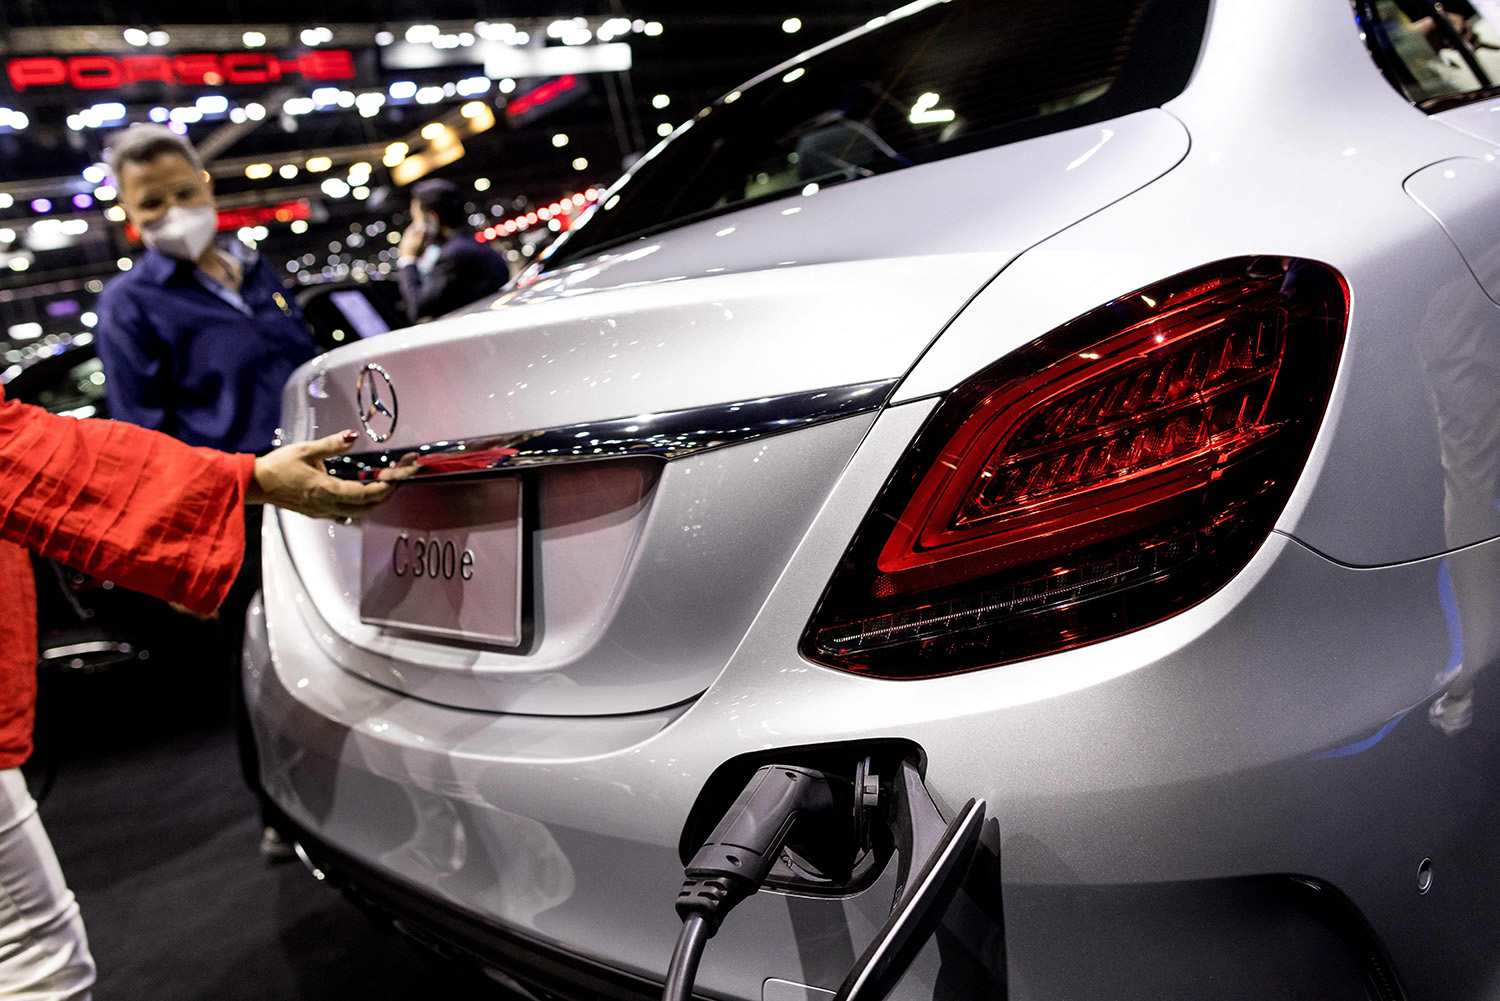 Mercedes C300e plug-in hybrid with charger installed at Thailand International Auto Show 